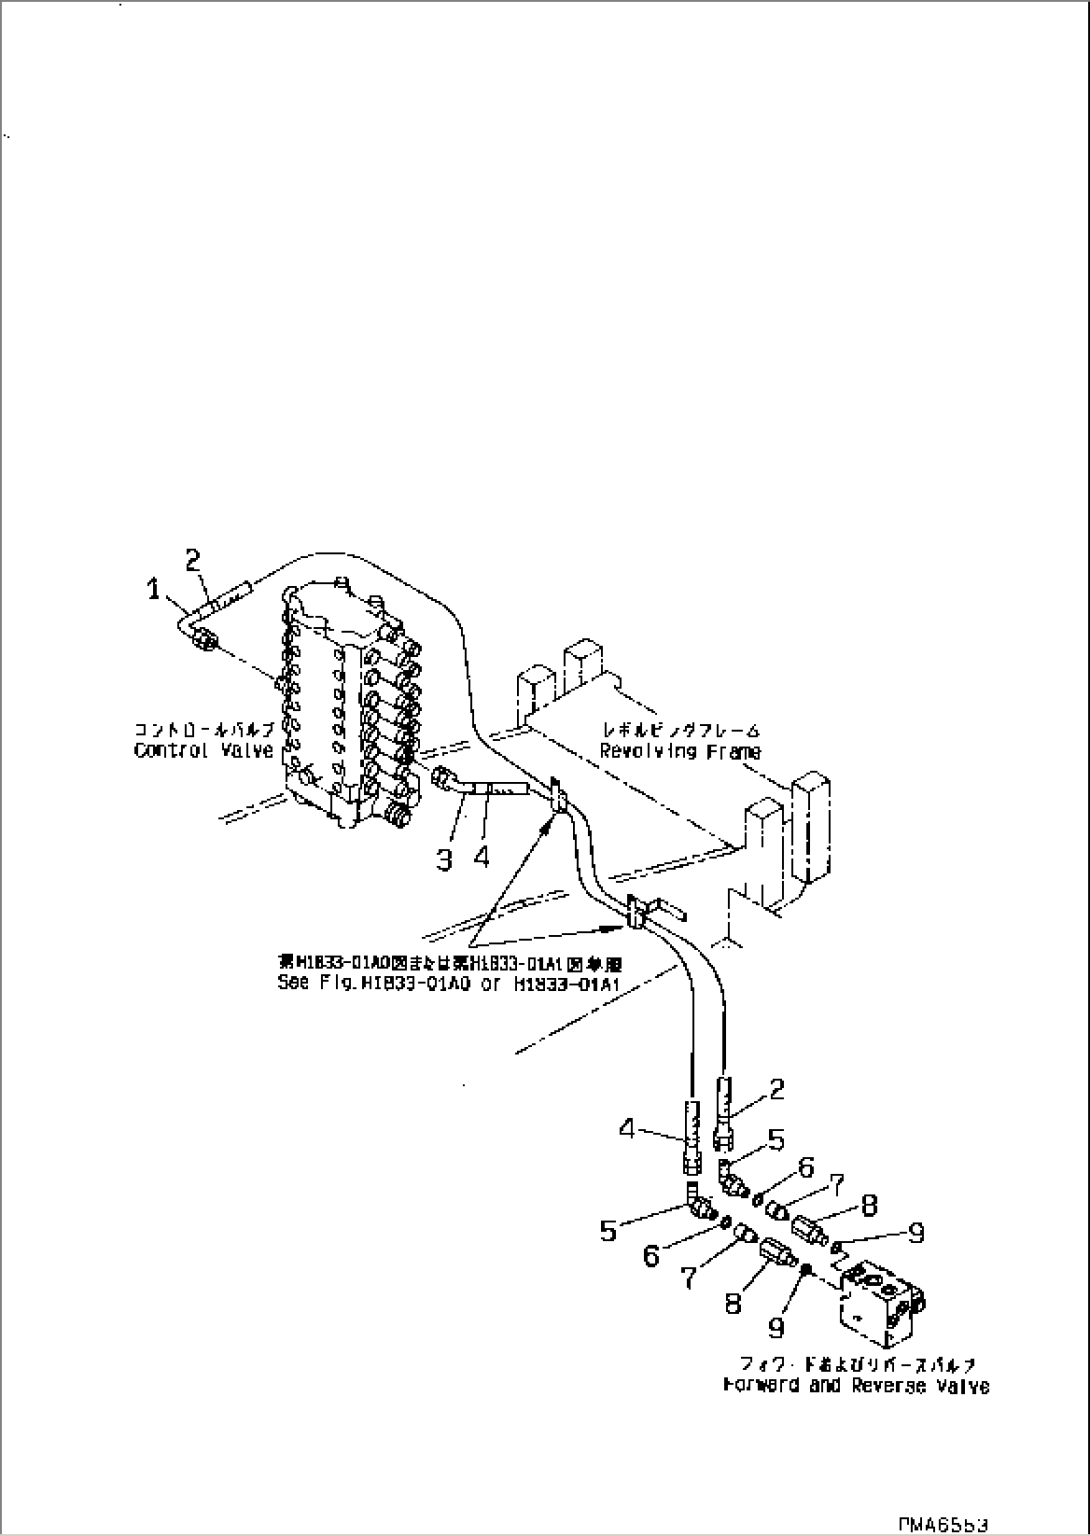 VALVE PIPING (FORWARD AND REVERSE VALVE)